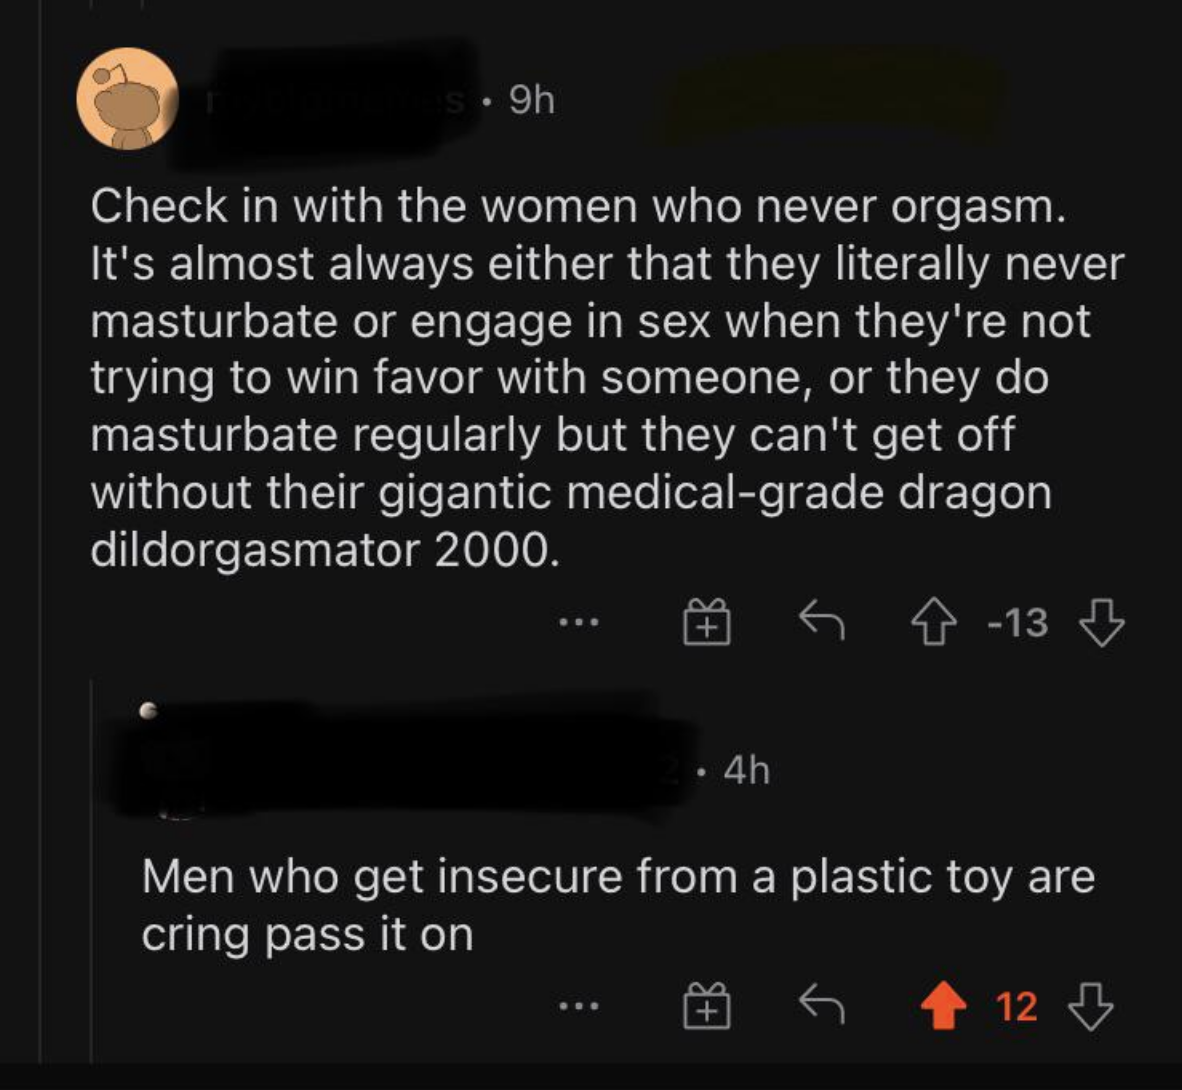 Women who never orgasm either never masturbate or have sex &quot;when they&#x27;re not trying to win favor,&quot; or they do masturbate regularly, &quot;but they can&#x27;t get off without their gigantic medical-grade dragon dildorgasmator 2000&quot;